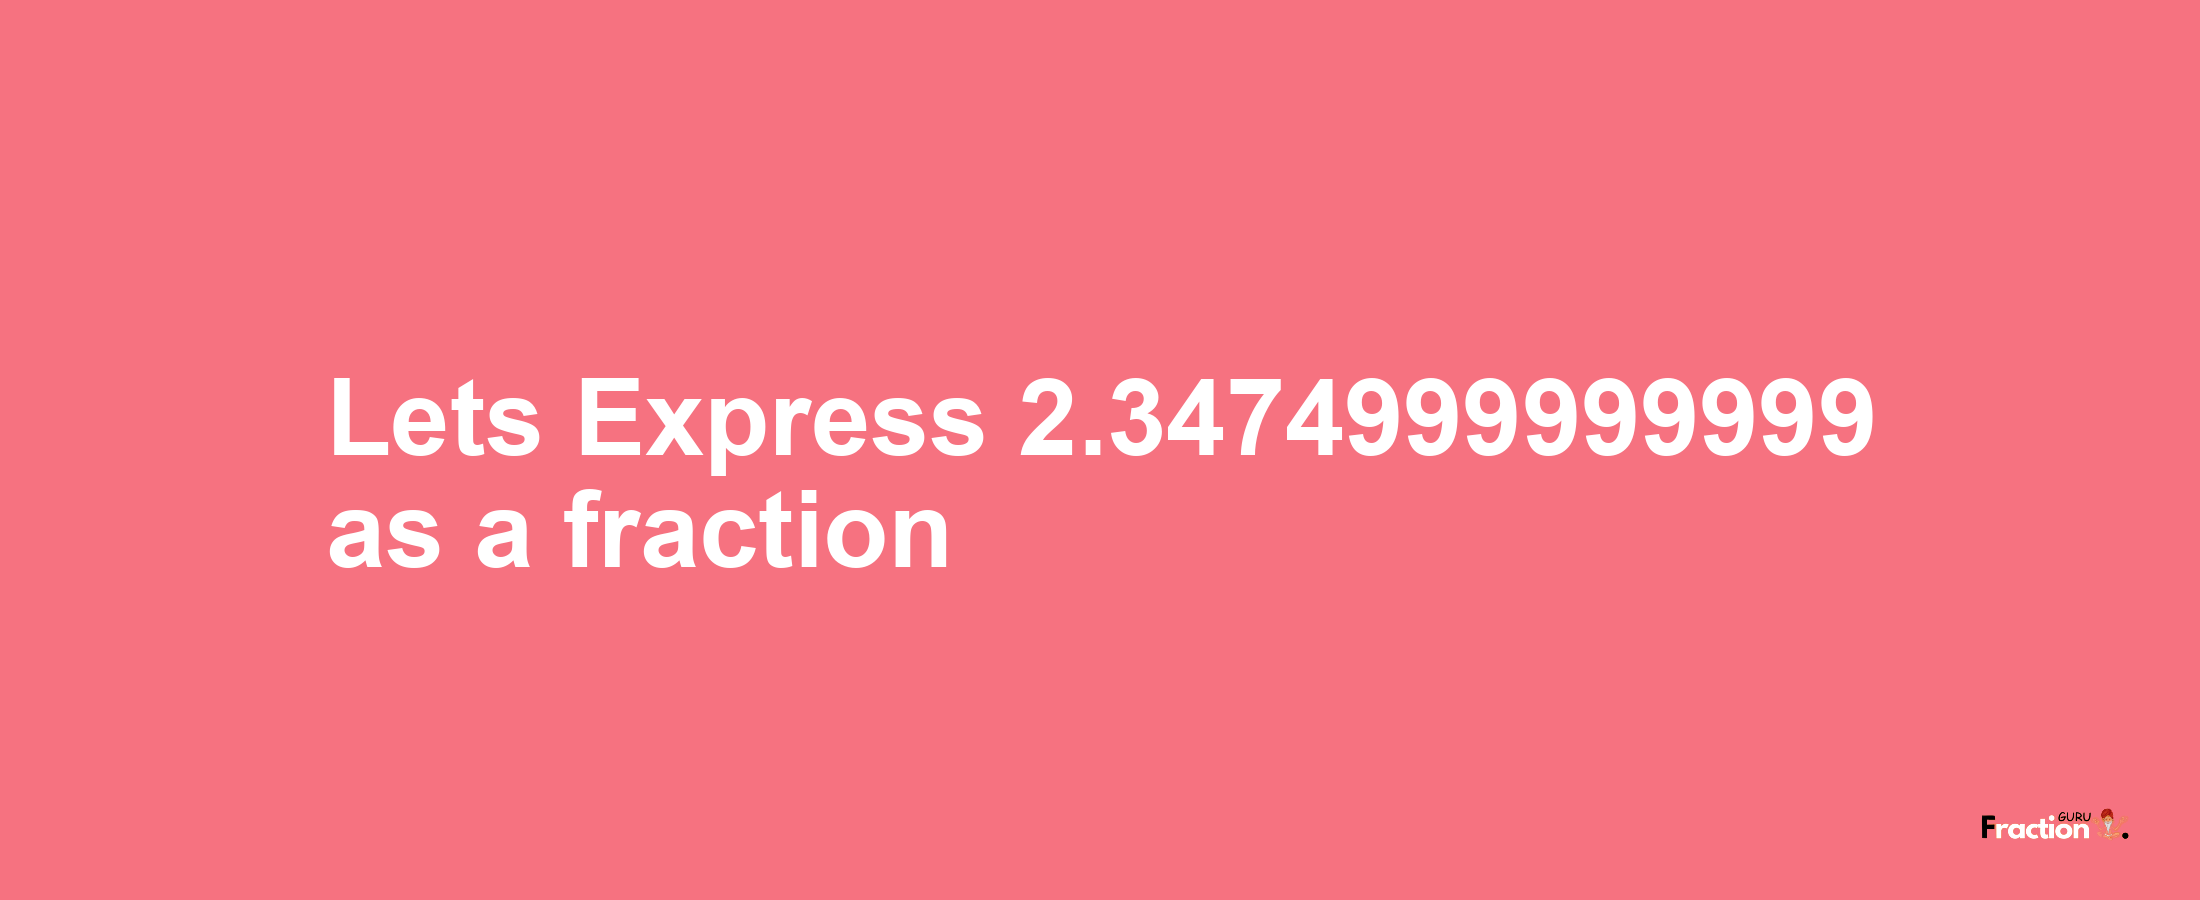 Lets Express 2.3474999999999 as afraction